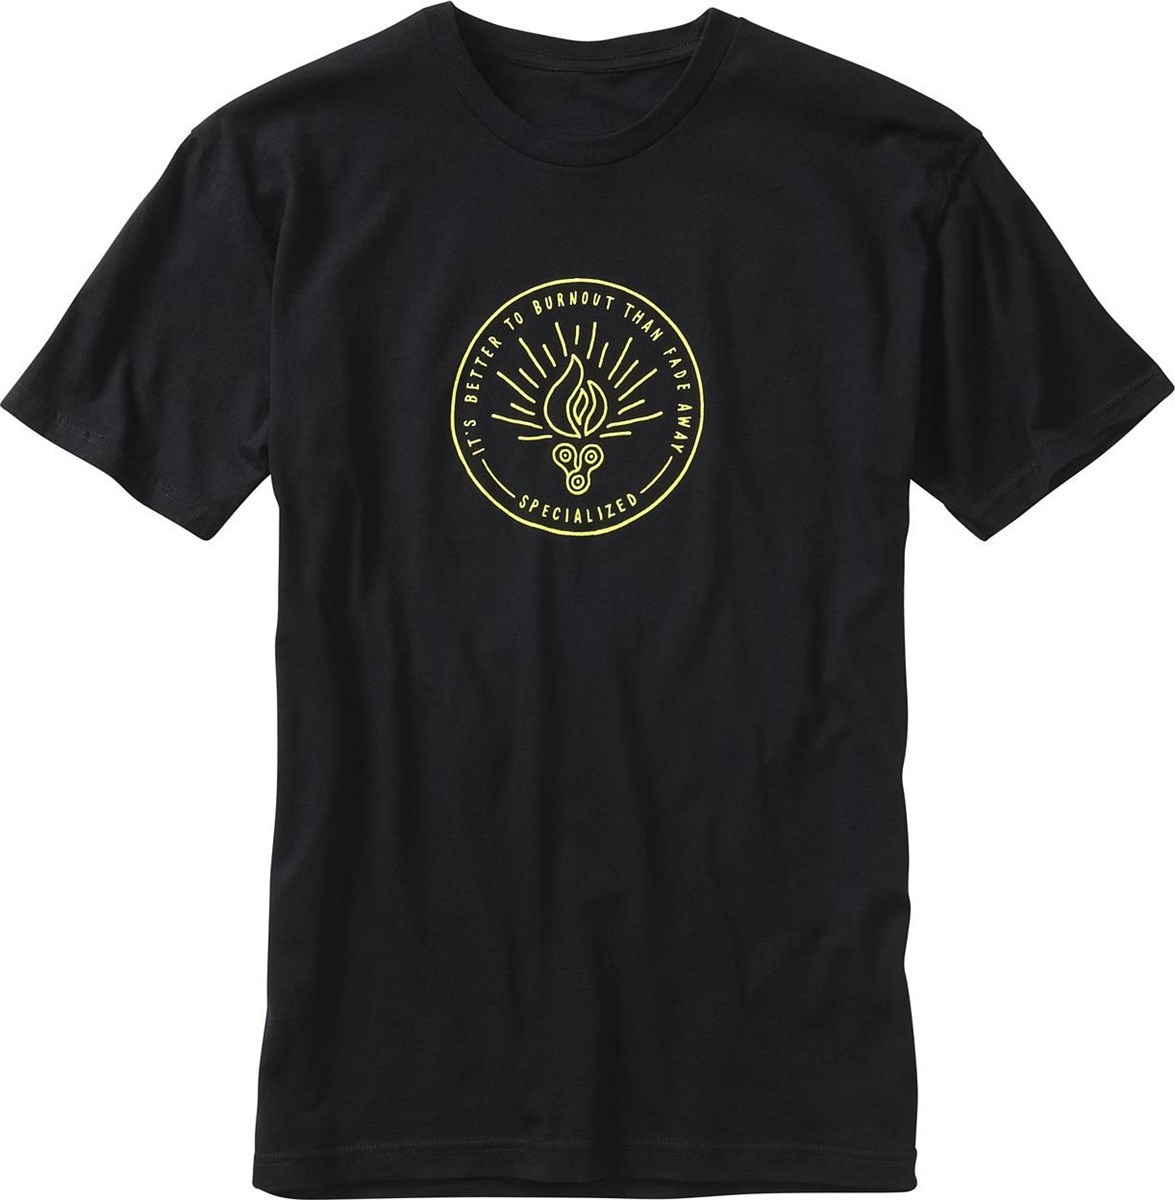 Specialized Graphic Tee - Torch Edition product image